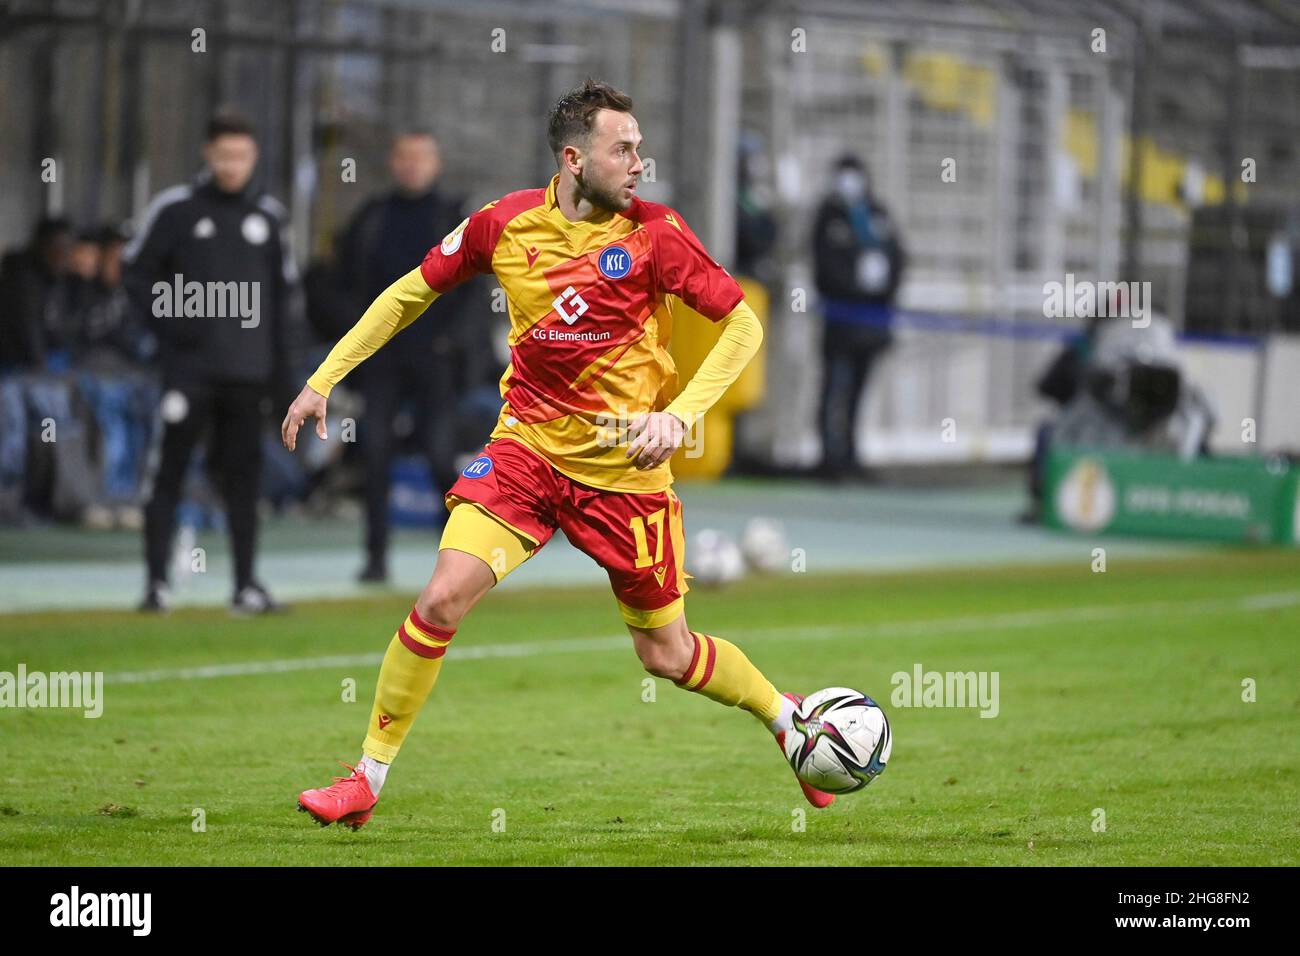 Munich GRUENWALDER STADIUM. 18th Jan, 2022. Lucas CUETO (Karlsruher SC), action, single action, single image, cut out, full body shot, full figure Soccer DFB Cup Round of 16, TSV Munich 1860-Karlsruher SC 0-1 on January 18th, 2022 in Munich GRUENWALDER STADIUM. DFL REGULATIONS PROHIBIT ANY USE OF PHOTOGRAPHS AS IMAGE SEQUENCES AND/OR QUASI-VIDEO. Credit: dpa/Alamy Live News Stock Photo